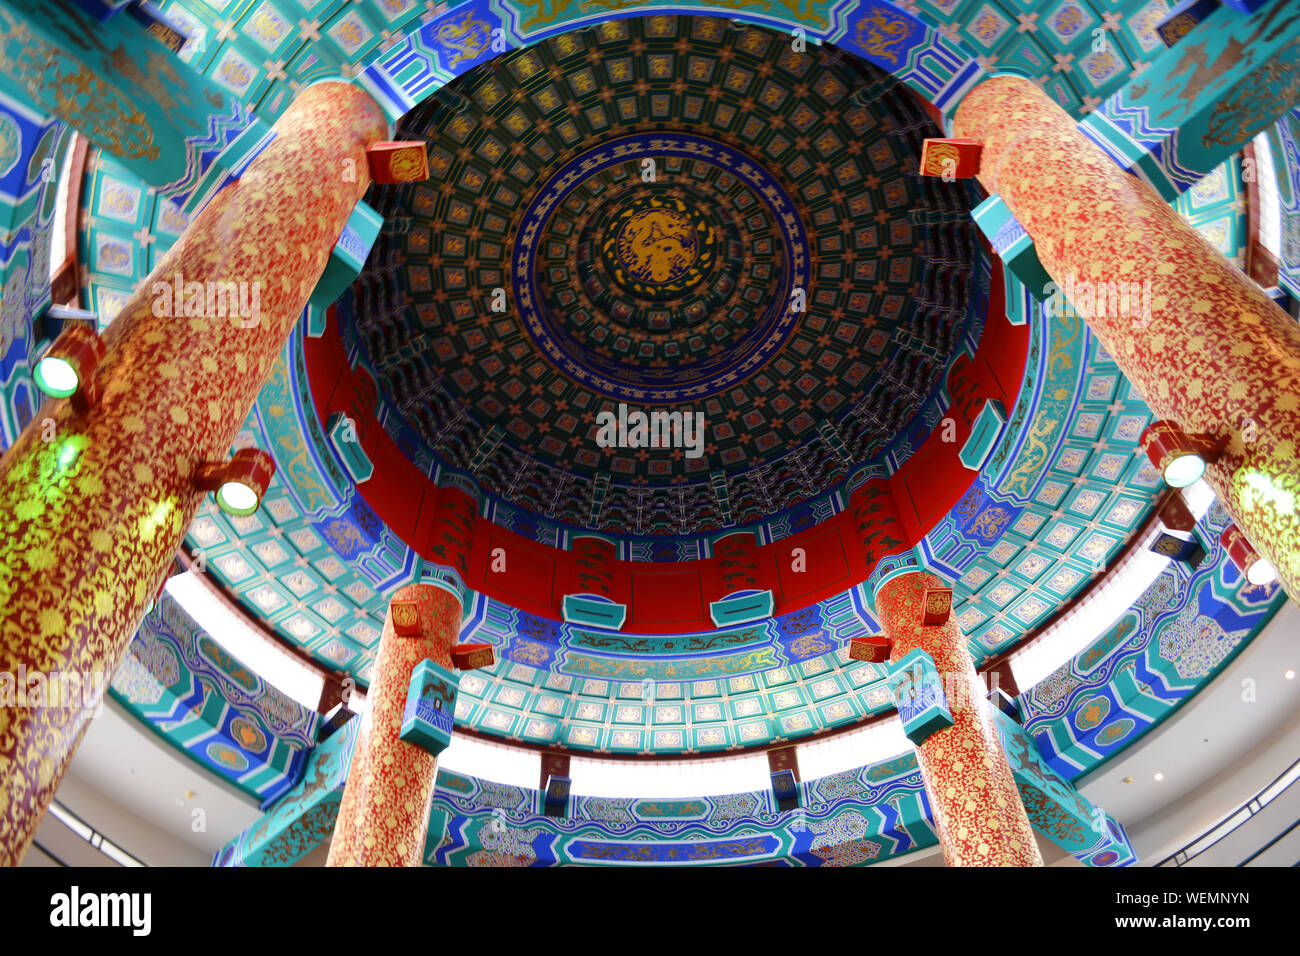 Ceiling of Asian Cultural Centre - Beautiful Interior Stock Photo